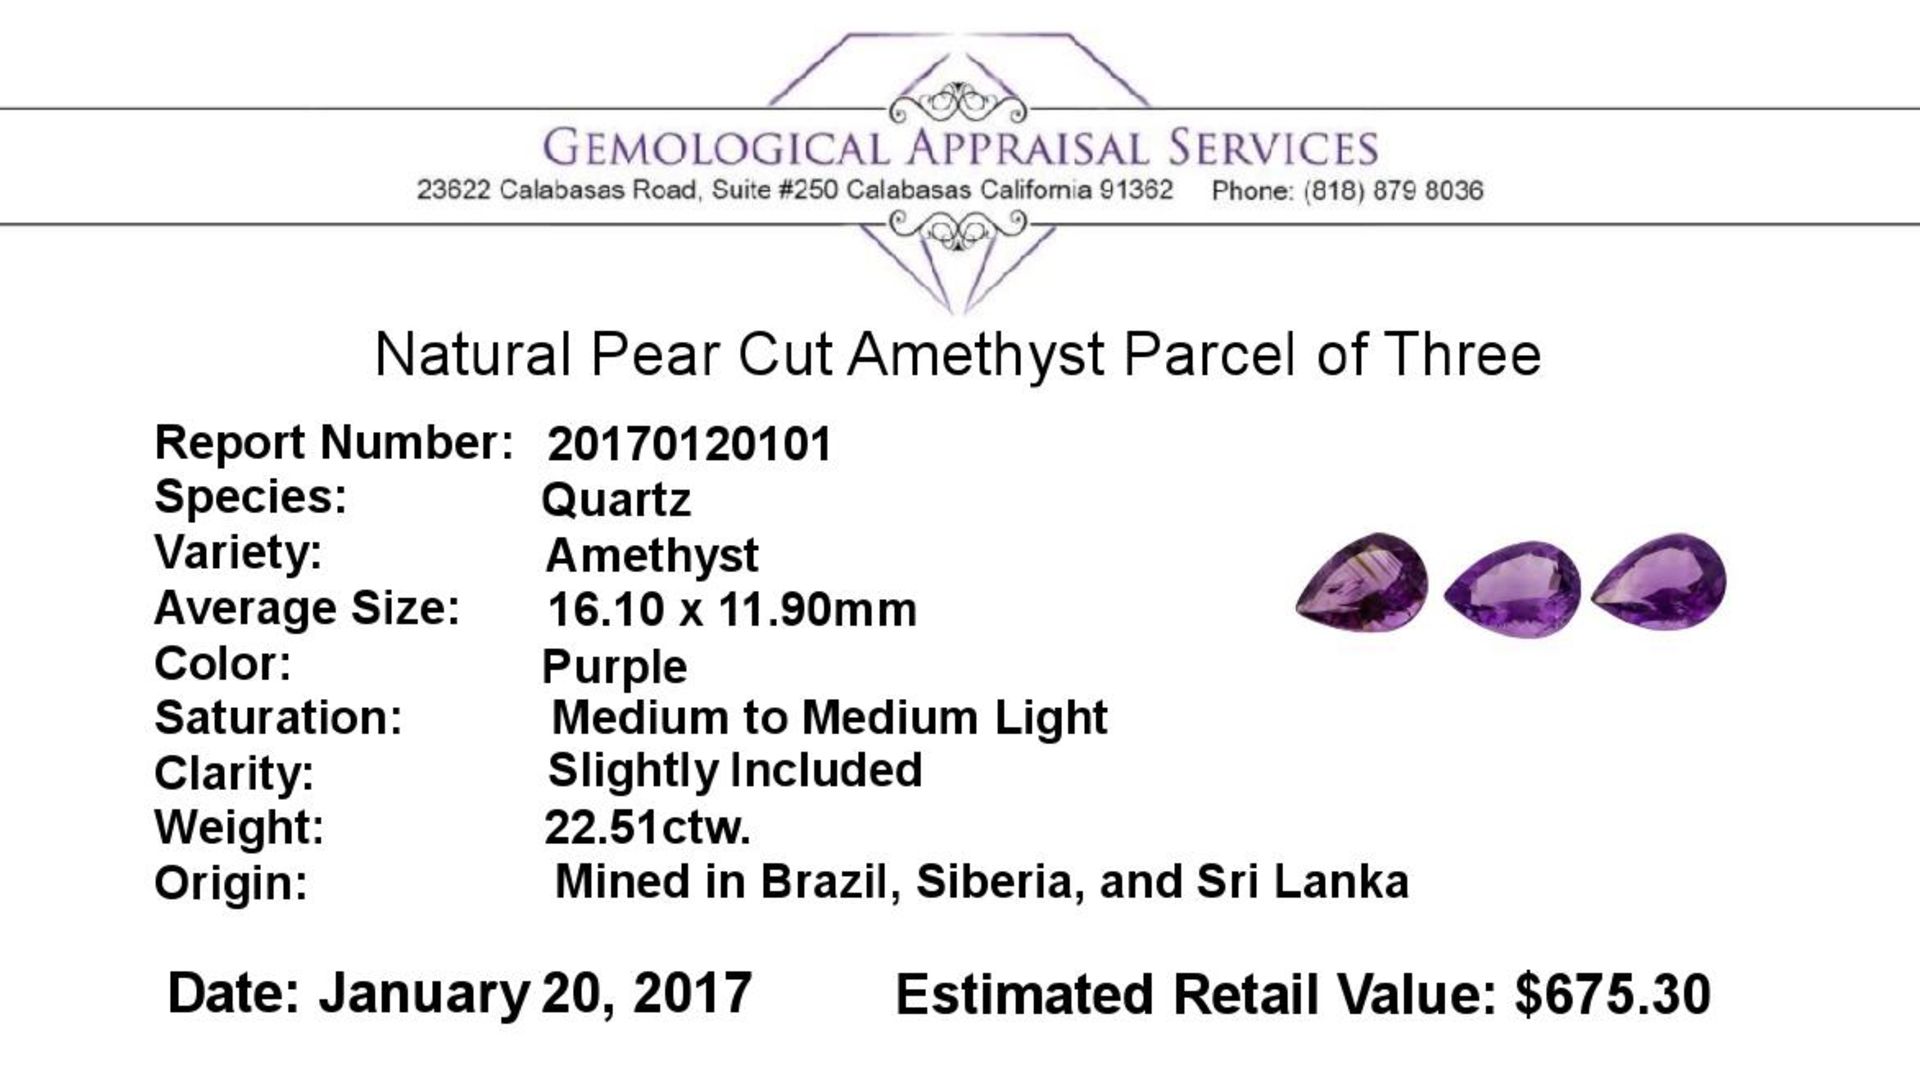 22.51ctw.Natural Pear Cut Amethyst Parcel of Three - Image 3 of 3